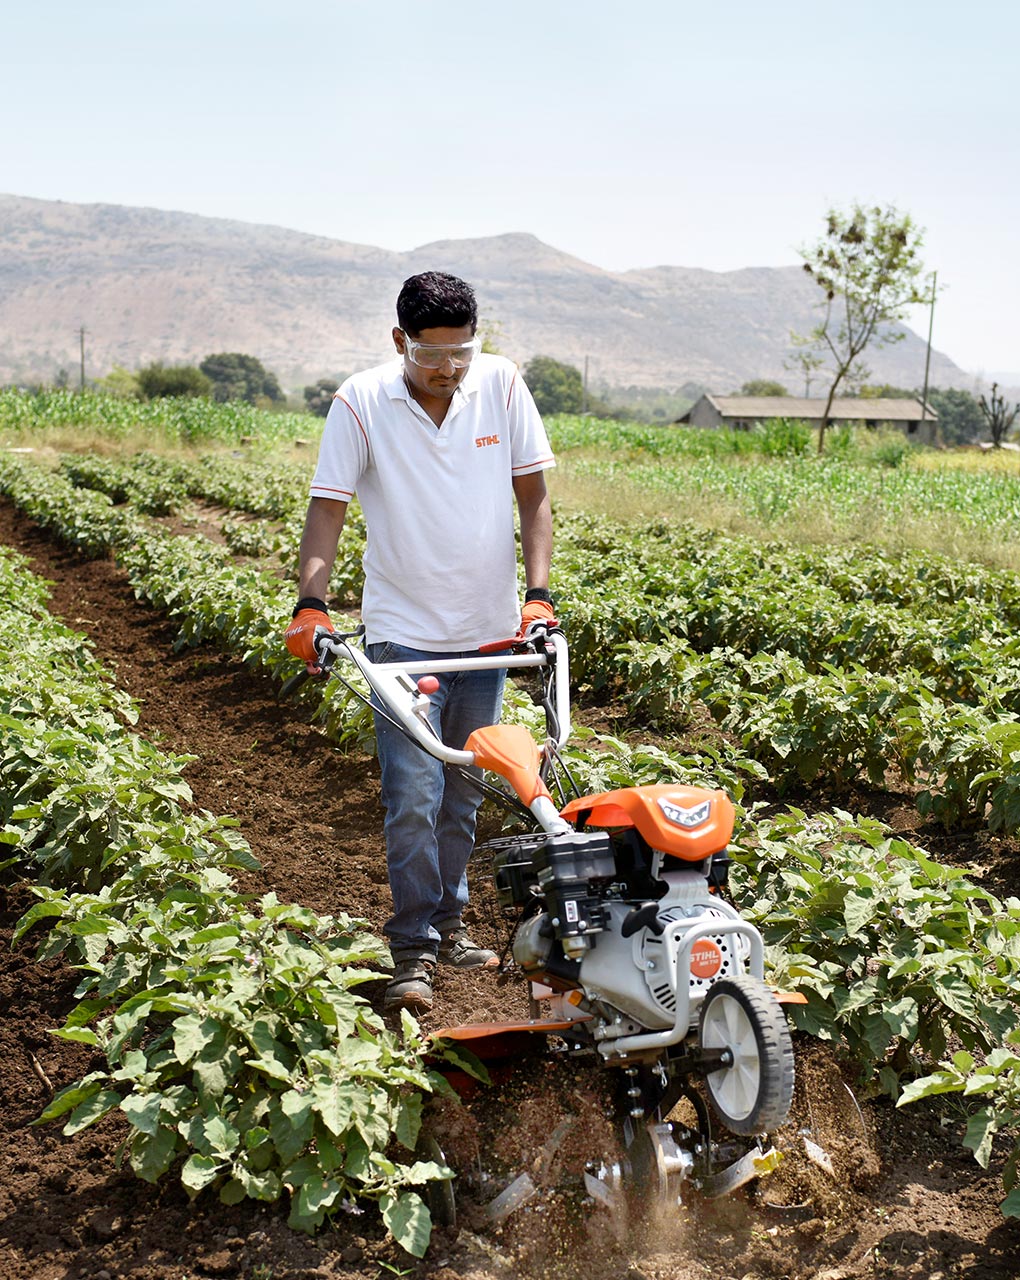 Power tillers like the STIHL MH 710 are popular with farmers in India. The Indian government recently began offering subsidies to purchase name-brand products. This makes it easier for even small farmers to buy equipment and do business.